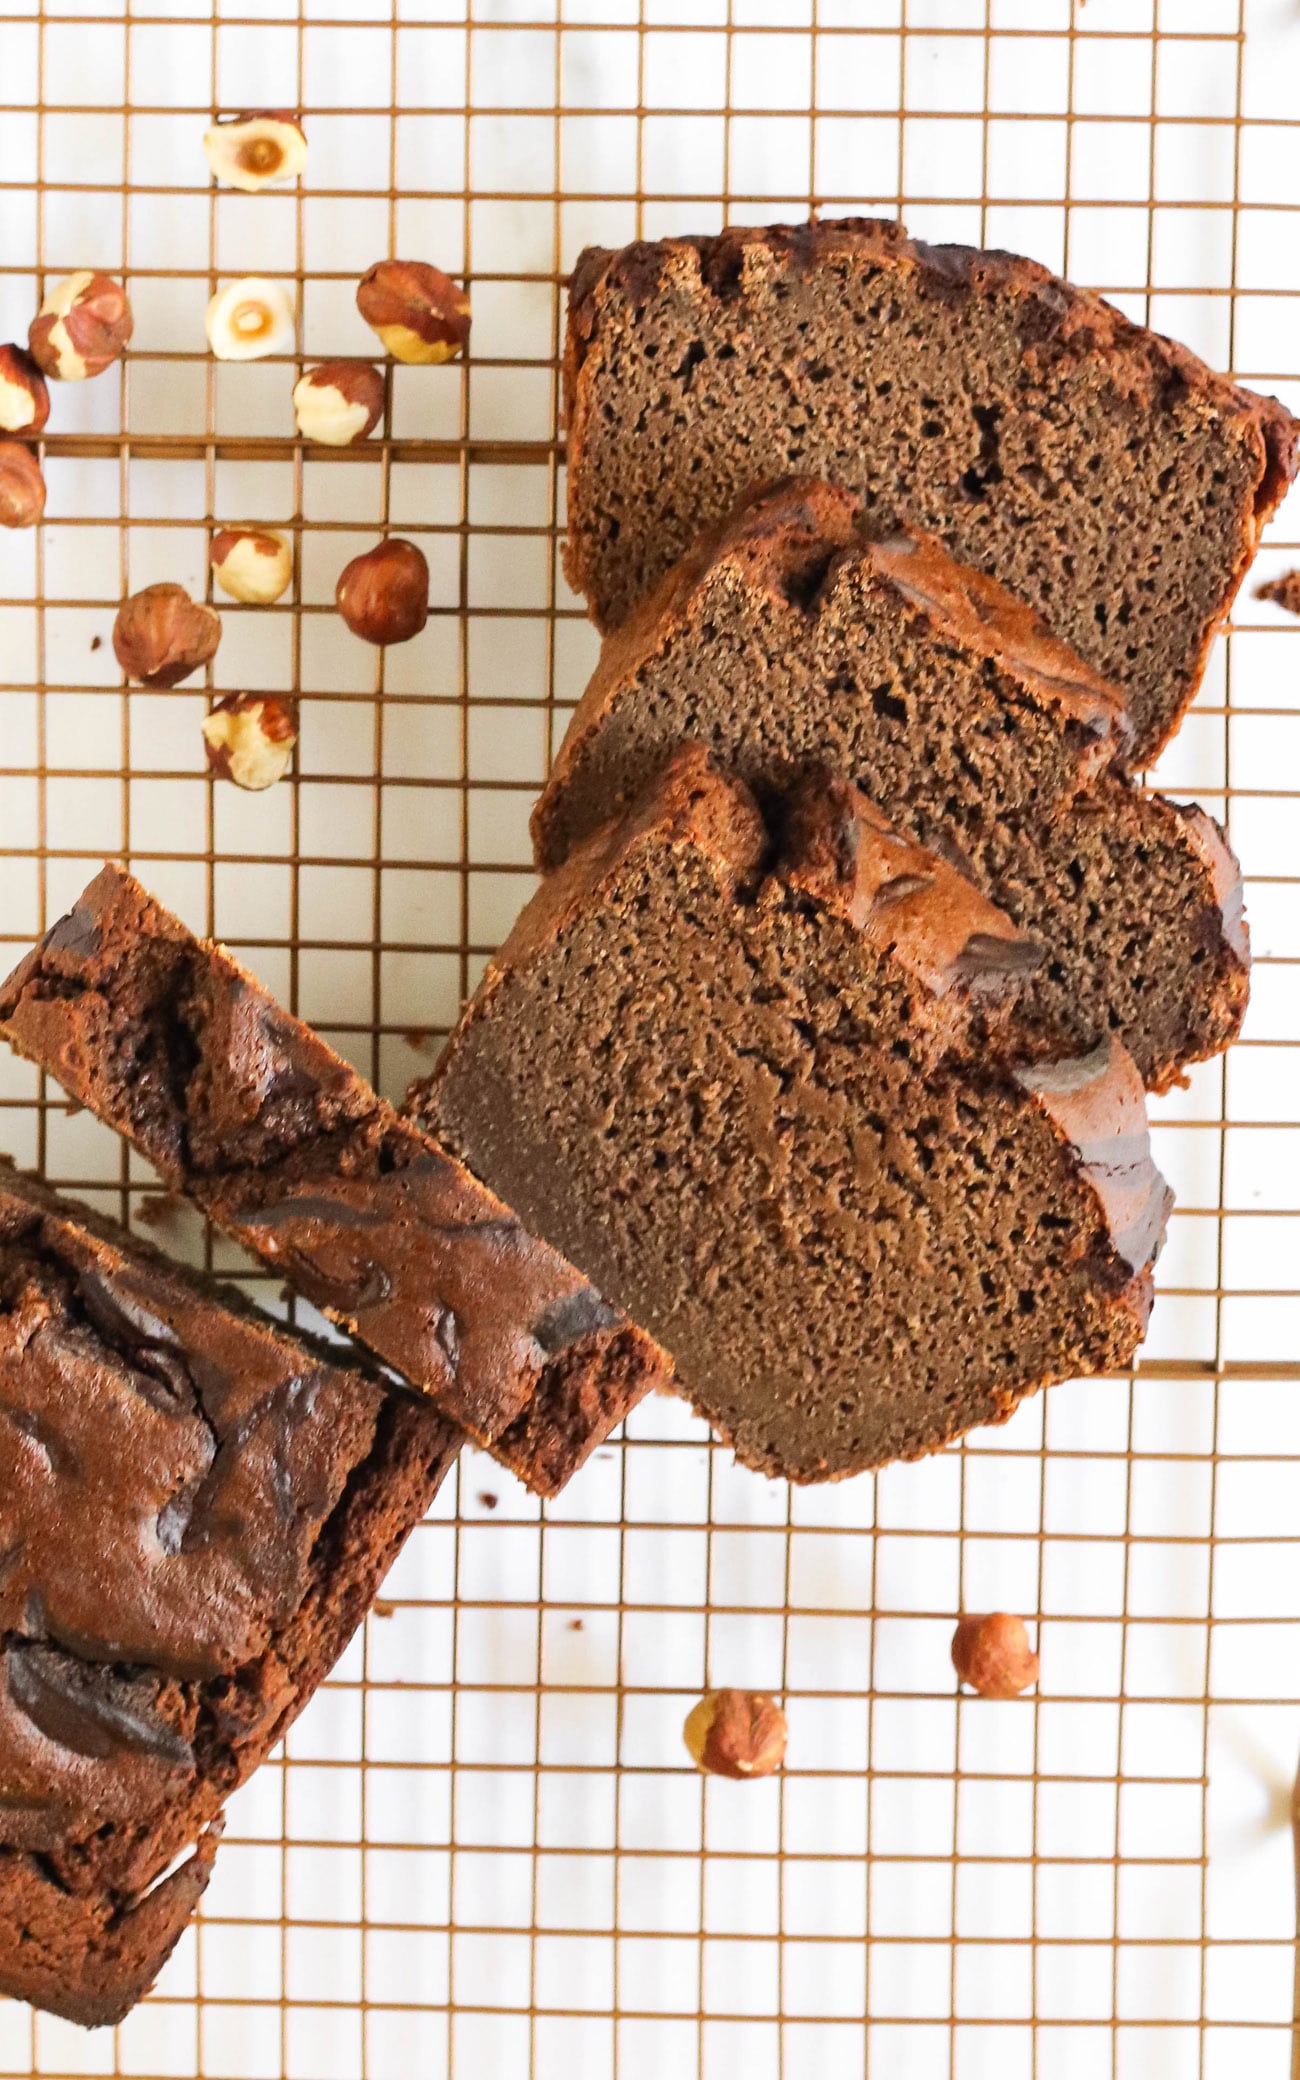 This Nutella Banana Bread is so moist, fluffy, springy, and chocolatey! It doesn't taste healthy, sugar free, gluten free, dairy free, high protein, or whole grain ONE BIT. It tastes like it's from a bakery! Made with low carb, paleo, and keto-friendly homemade Nutella!